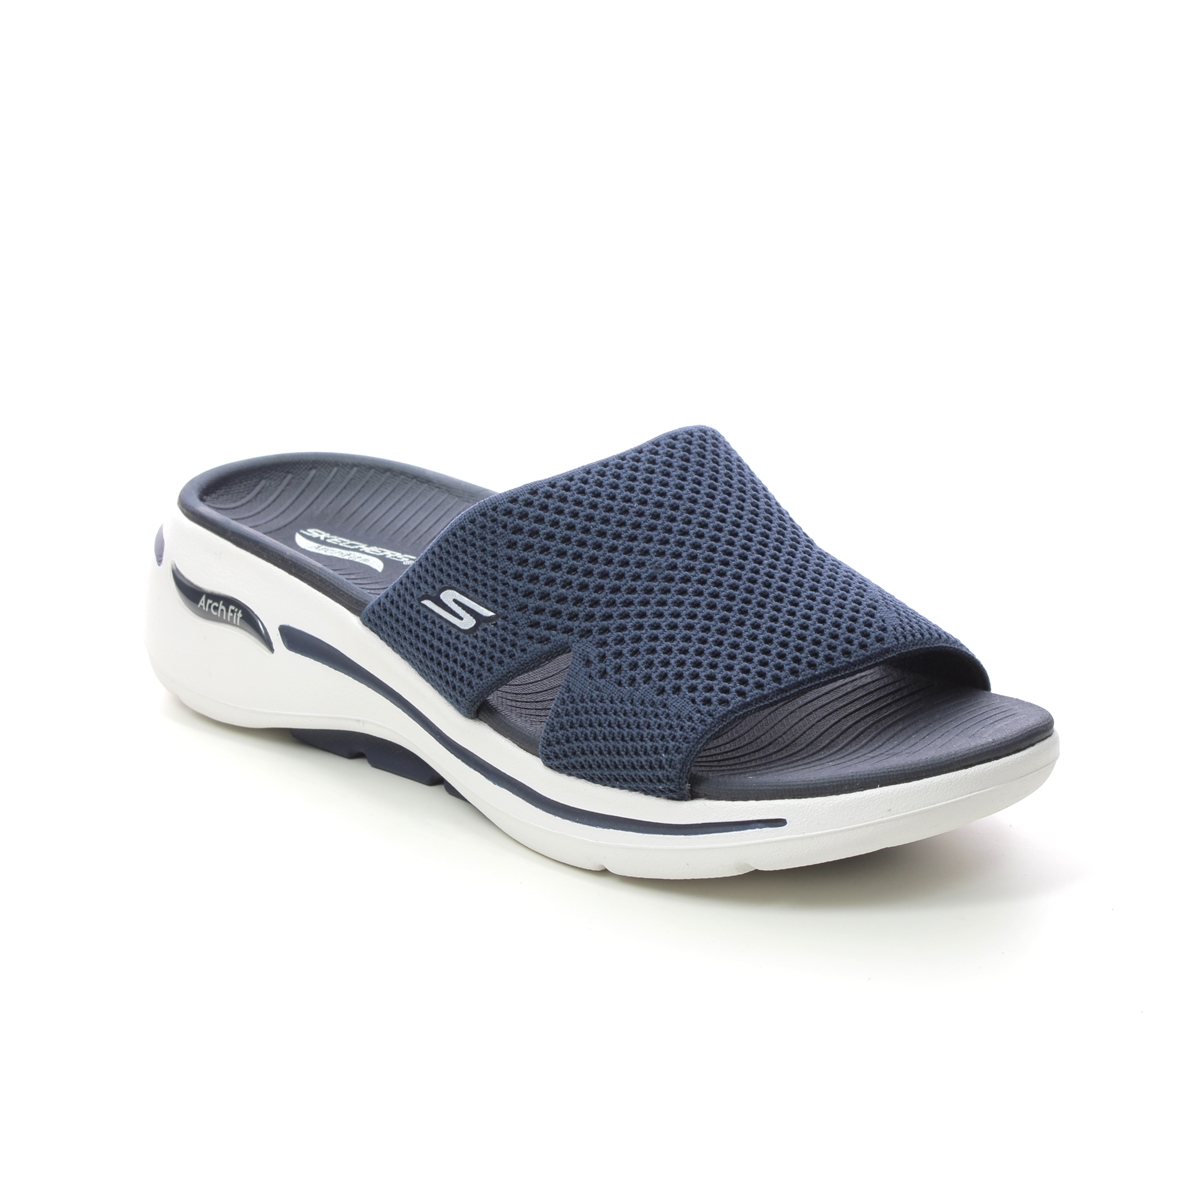 Skechers Arch Fit Worthy NVY Navy Womens Slide Sandals 140224